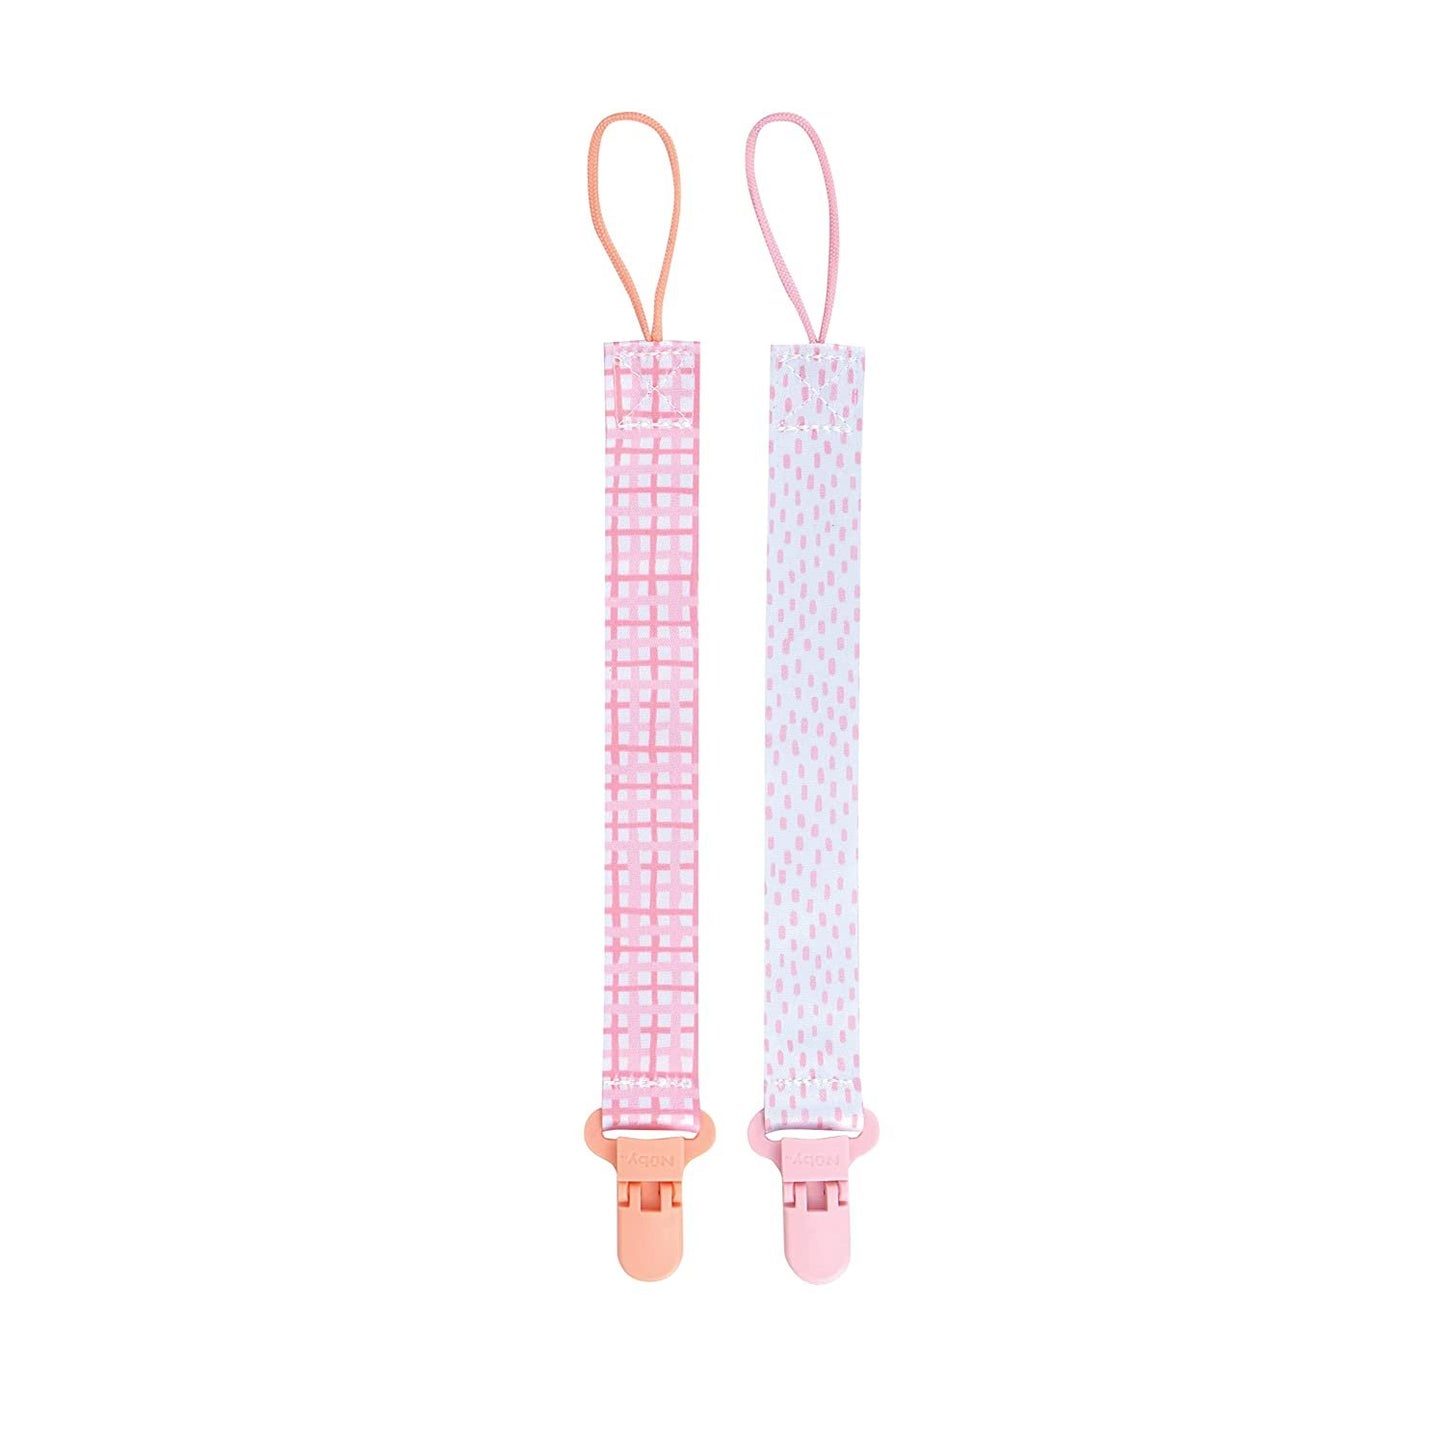 Nuby Infant's 2-Pack Pacifinder Pacifier Clips